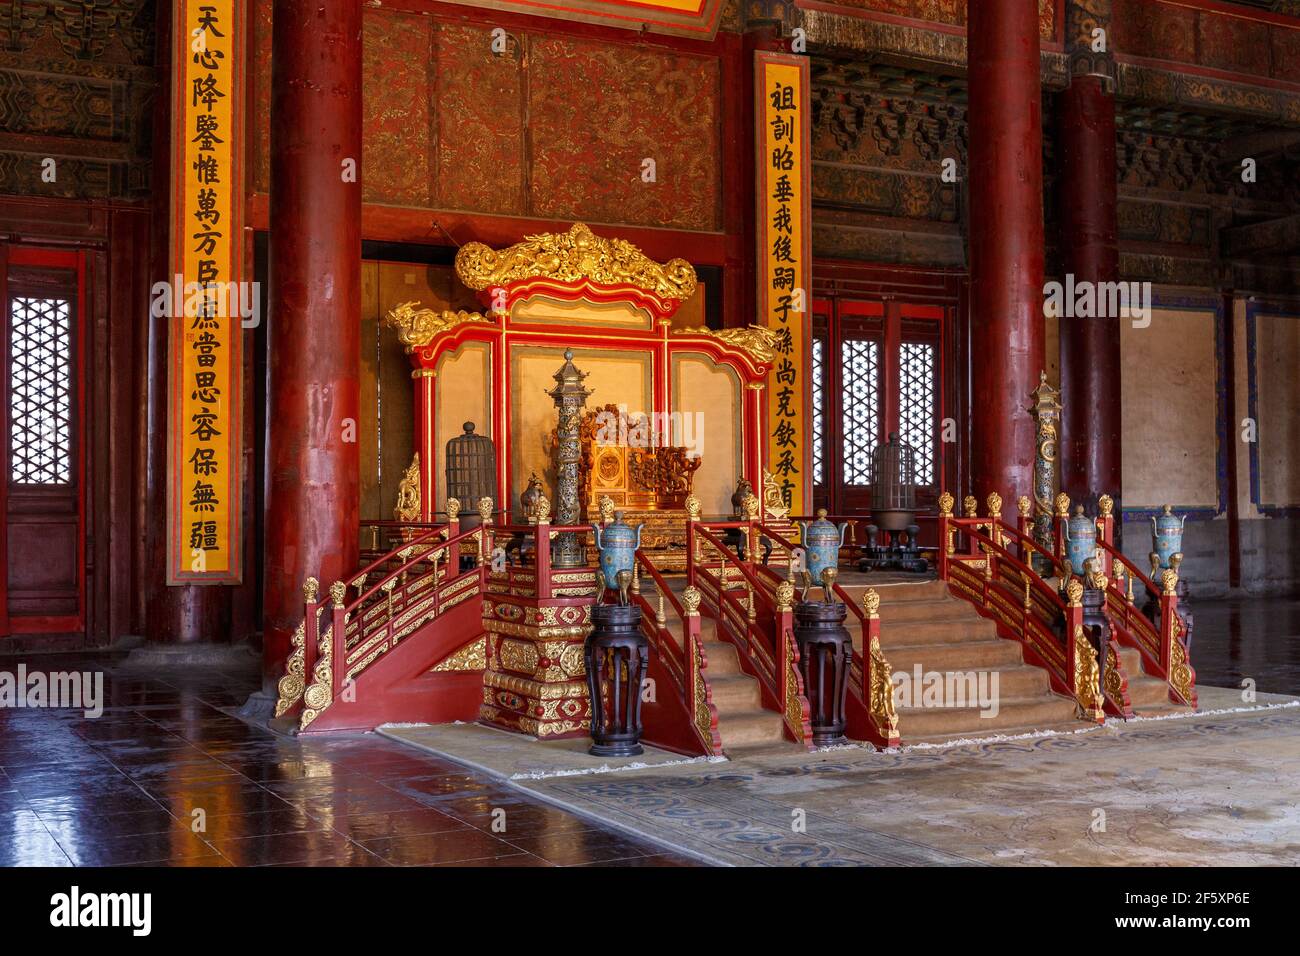 Throne at the Forbidden City in Beijing, China in March 2018. Stock Photo